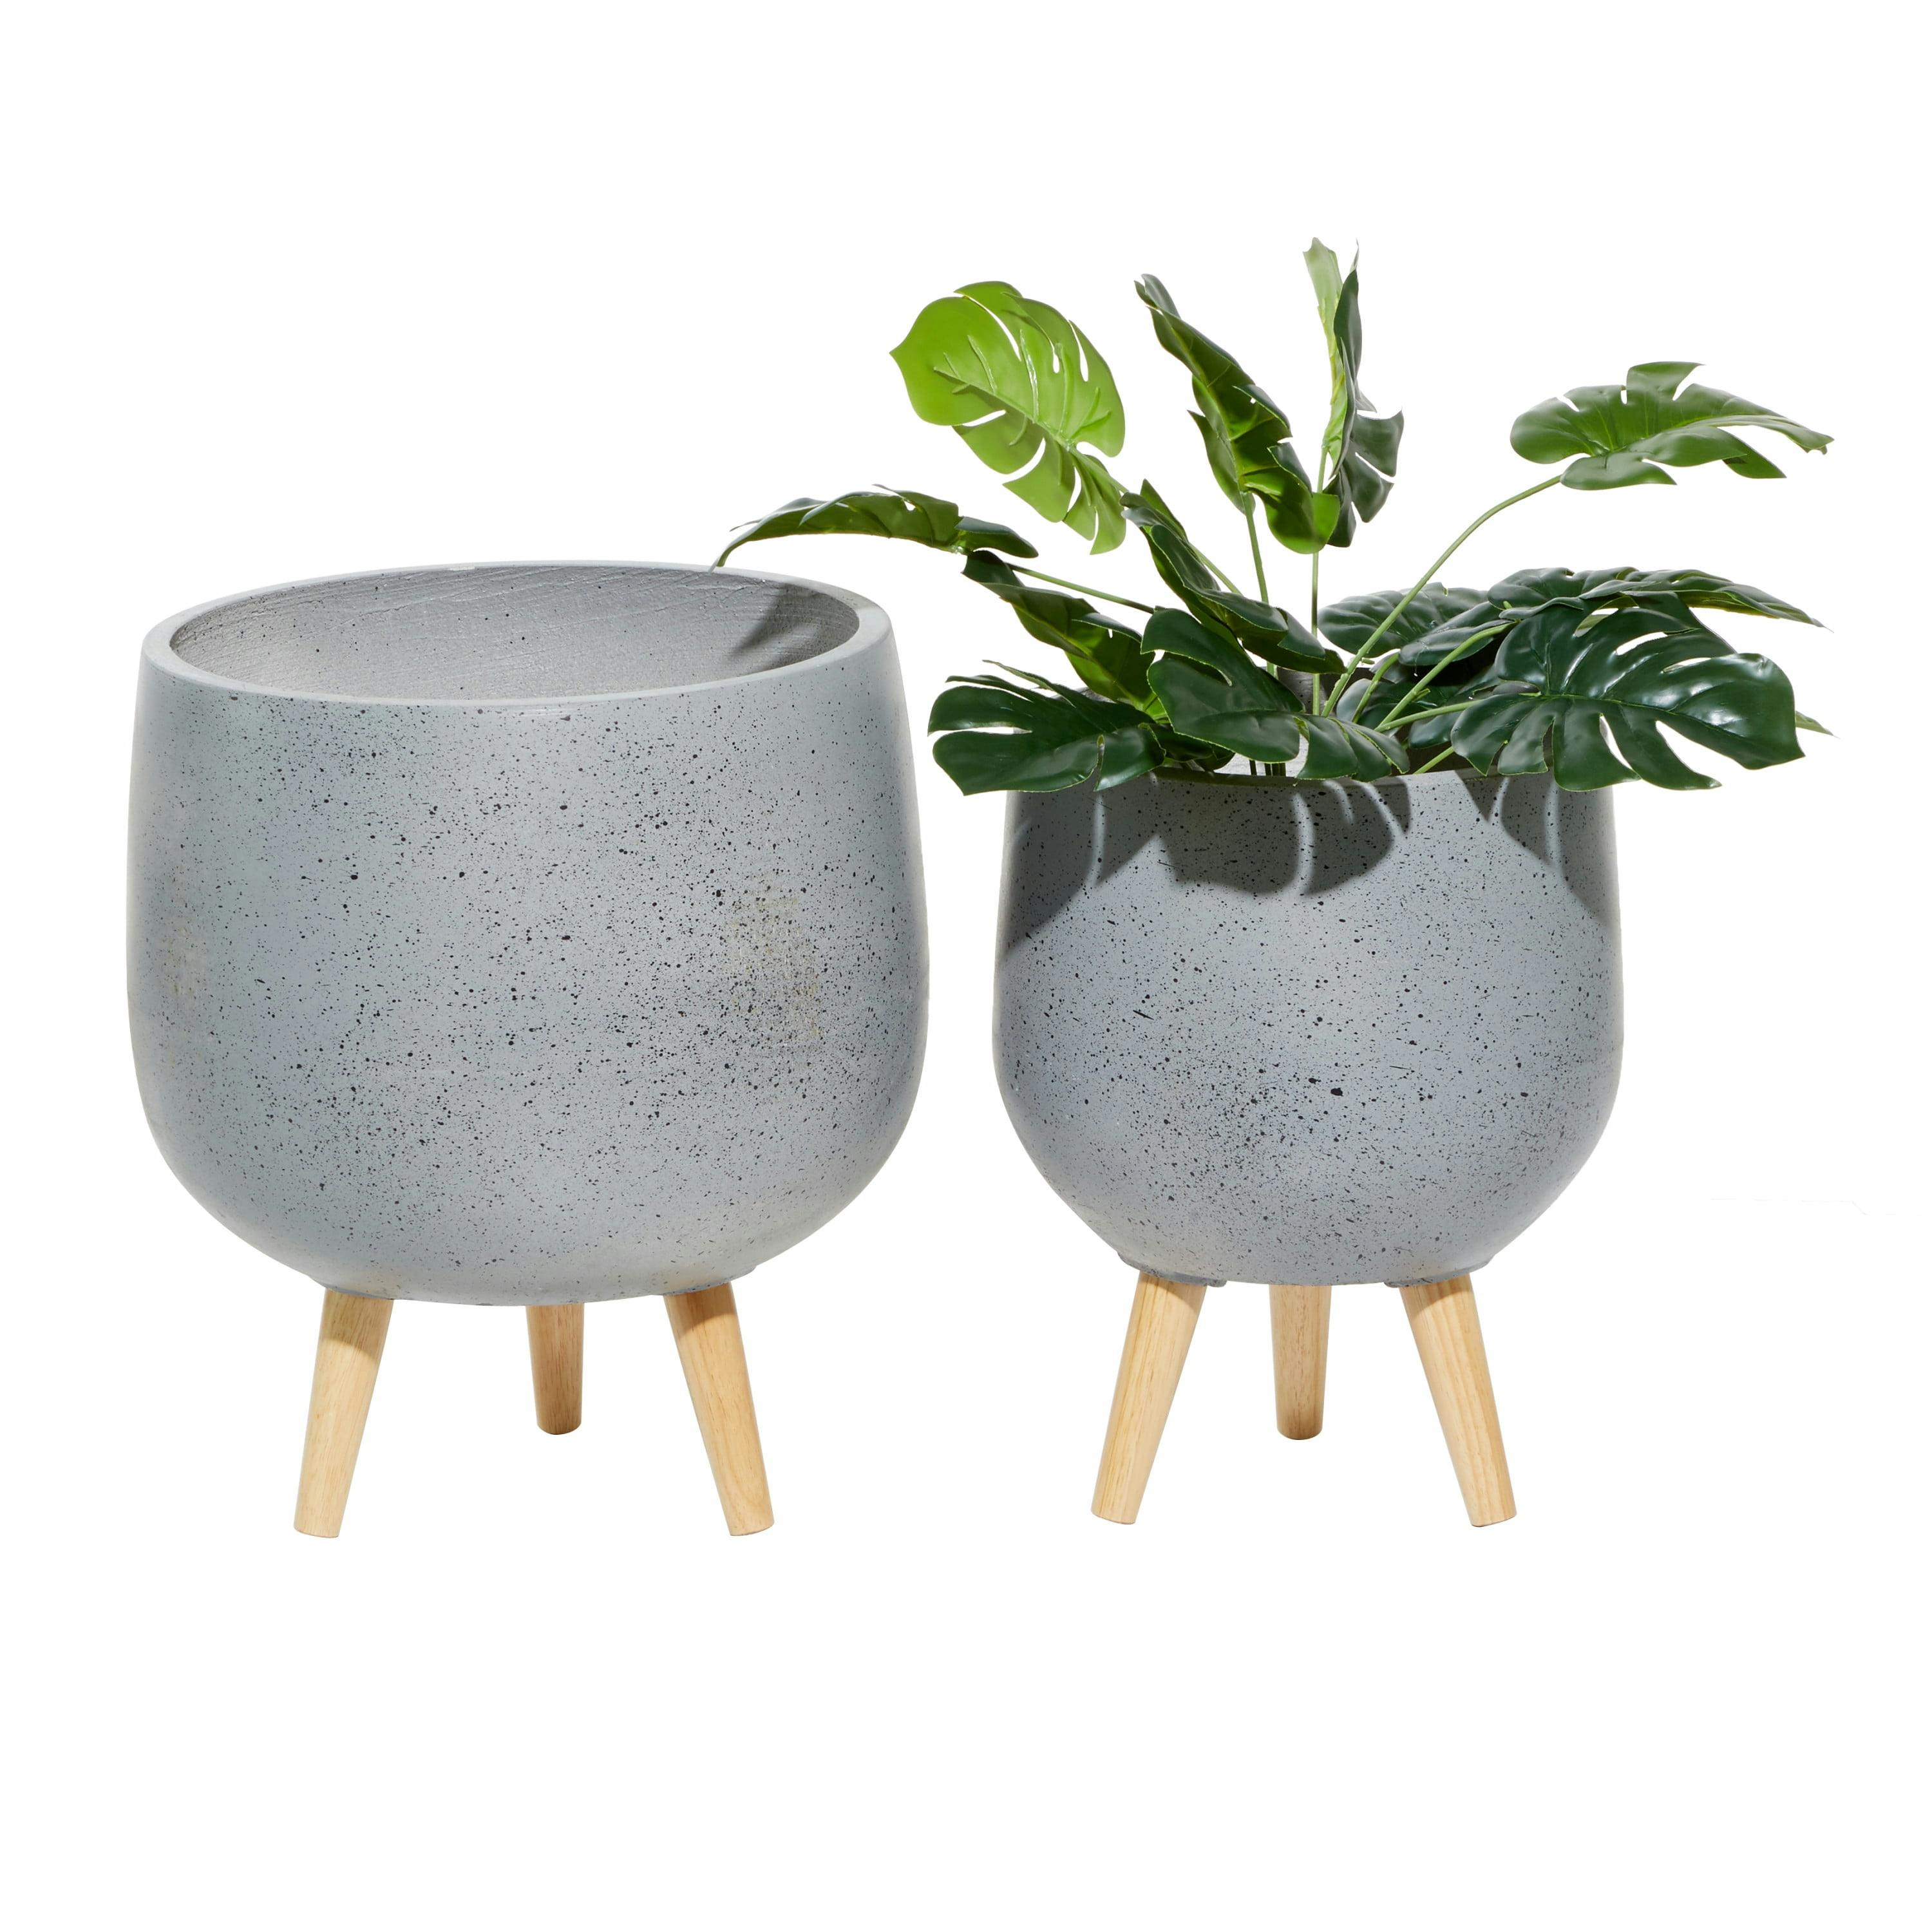 Chic Gray Marble Textured Fiber Clay Planter Set on Wooden Tripod Legs